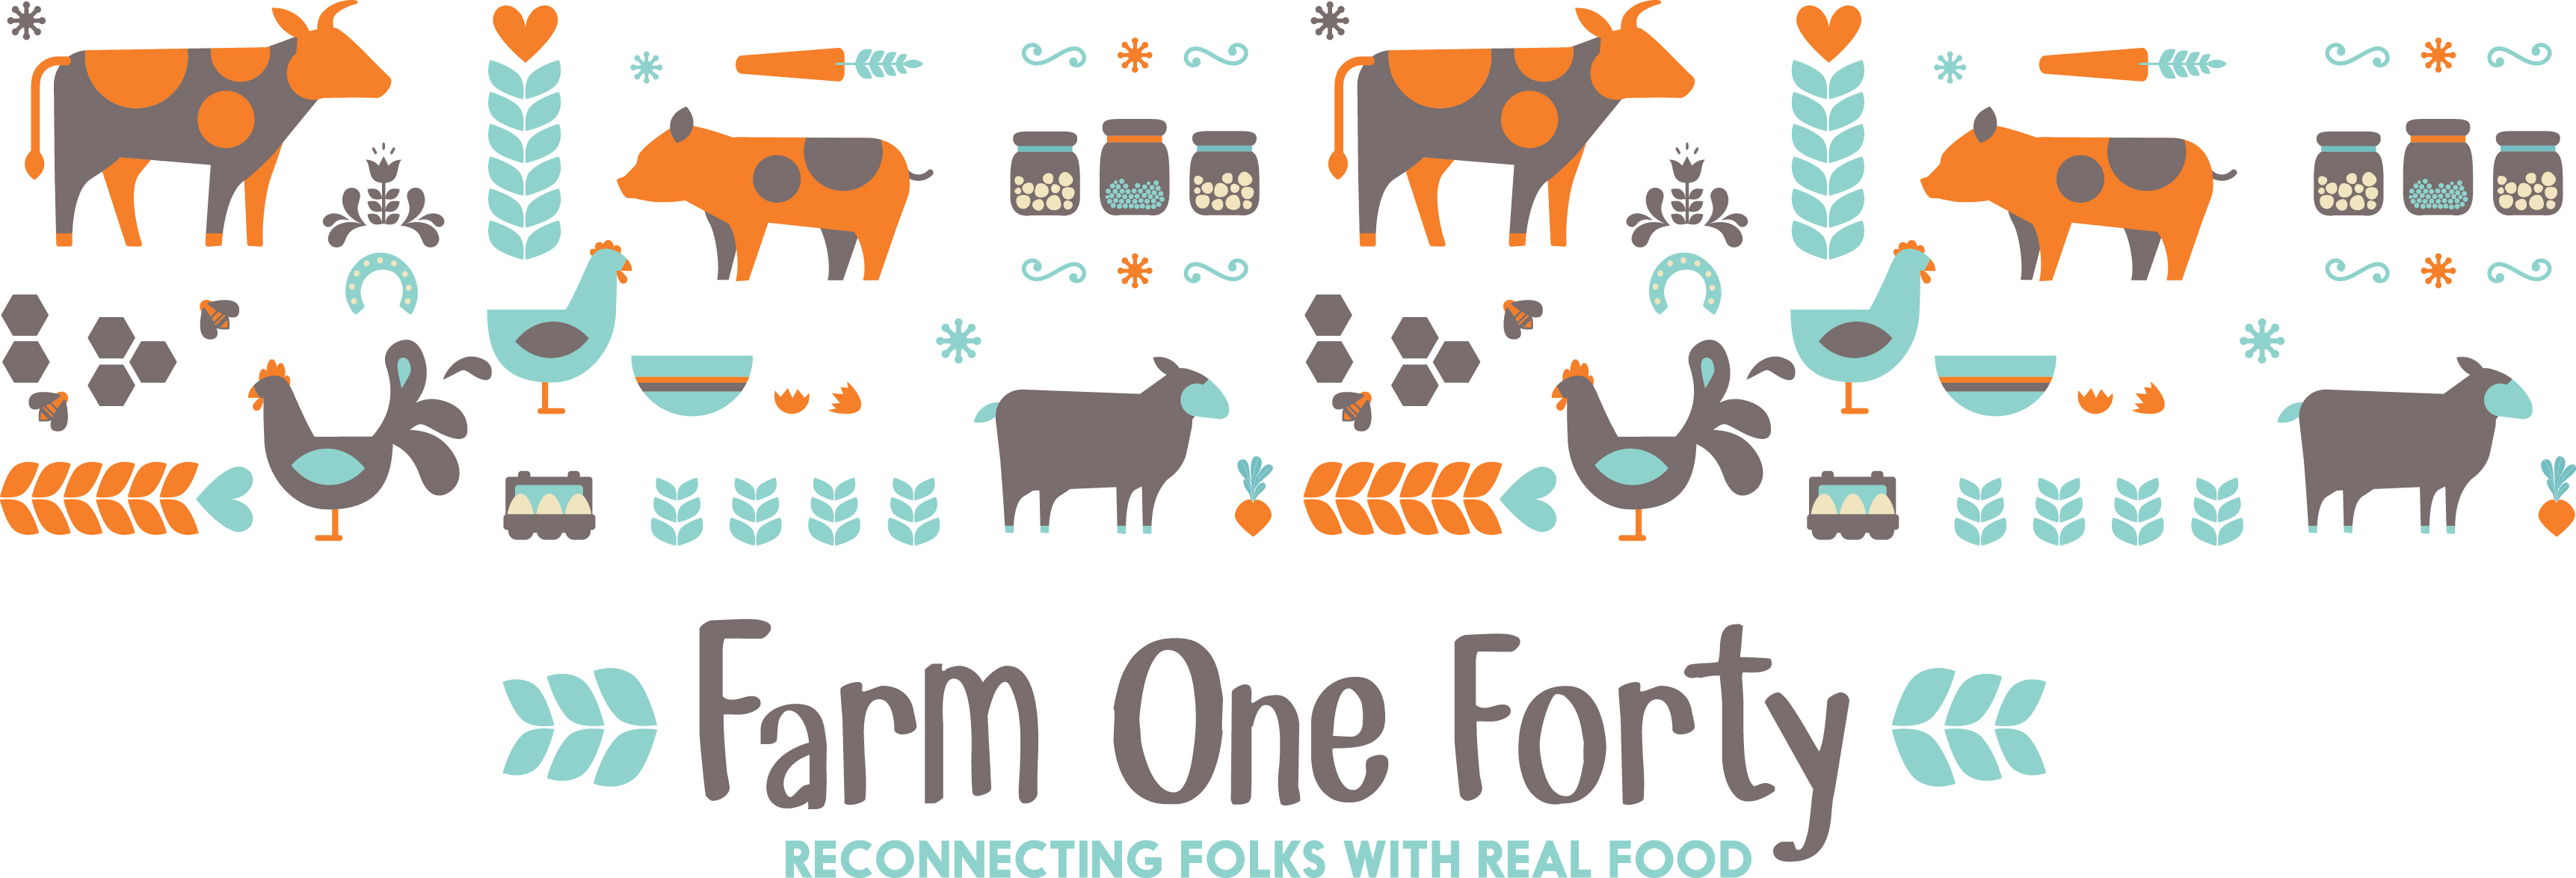 Farm One Forty banner